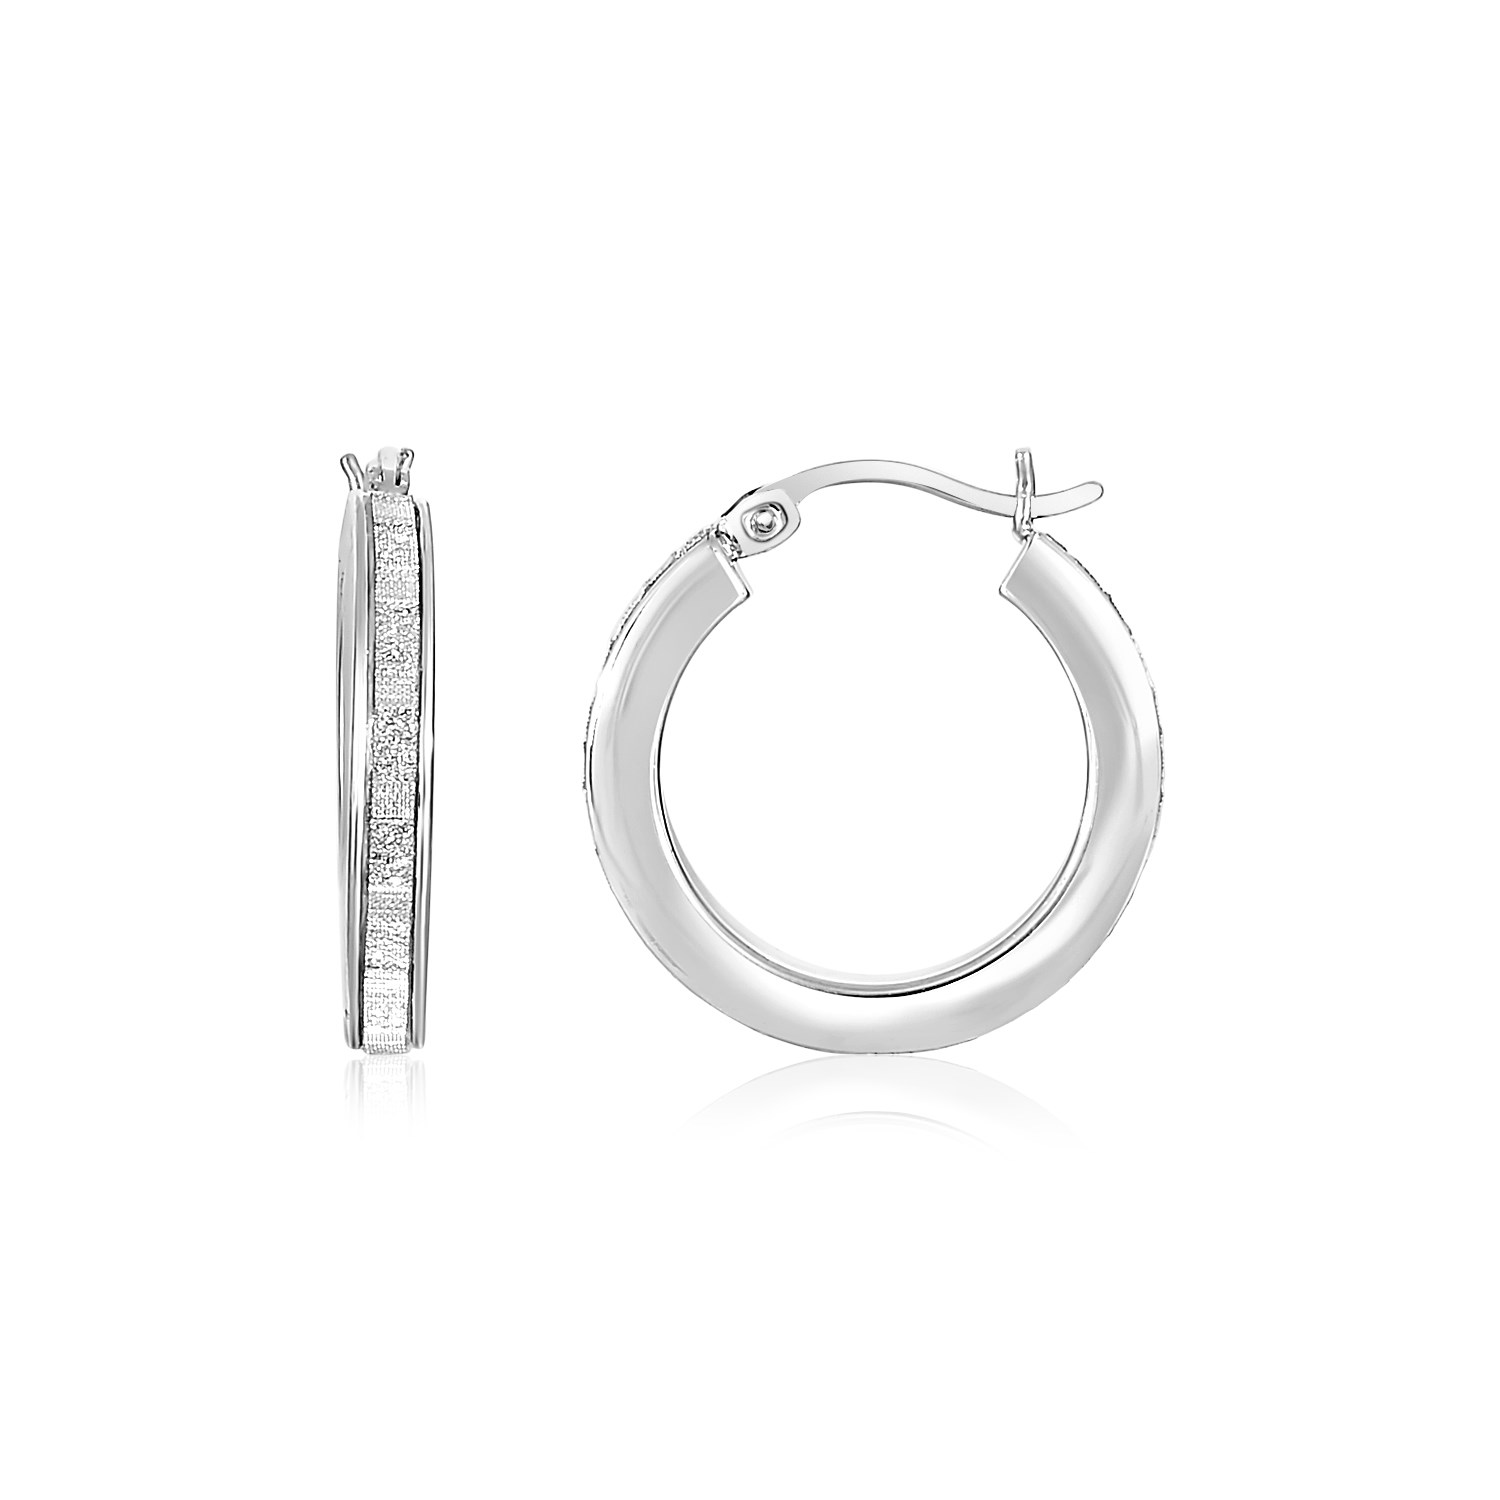 Sterling Silver Small Round Tube Hoop Earrings with Glitter Texture